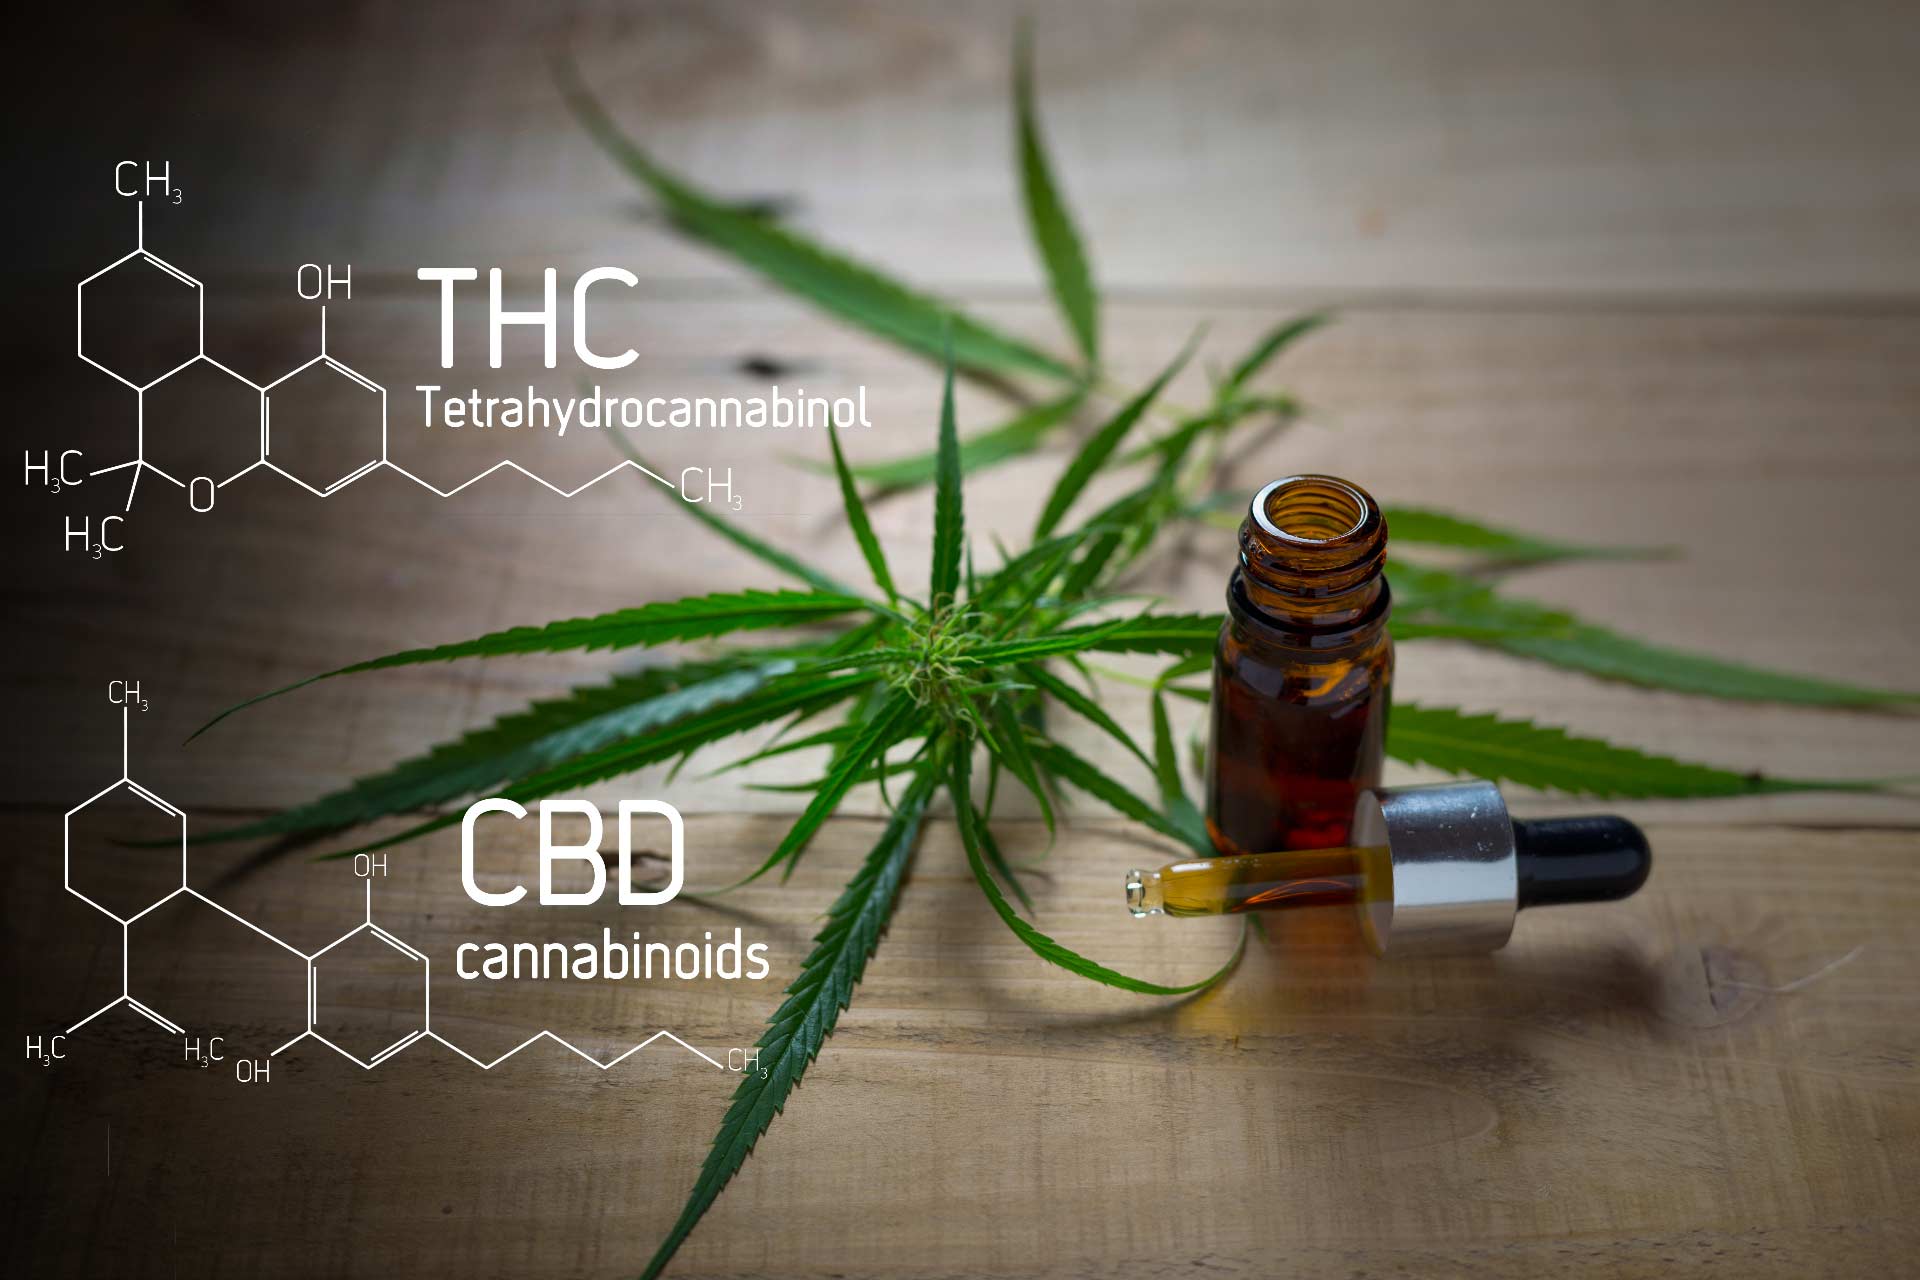 Finding the Best CBD:THC Ratios and Products for Pain - Leaf411